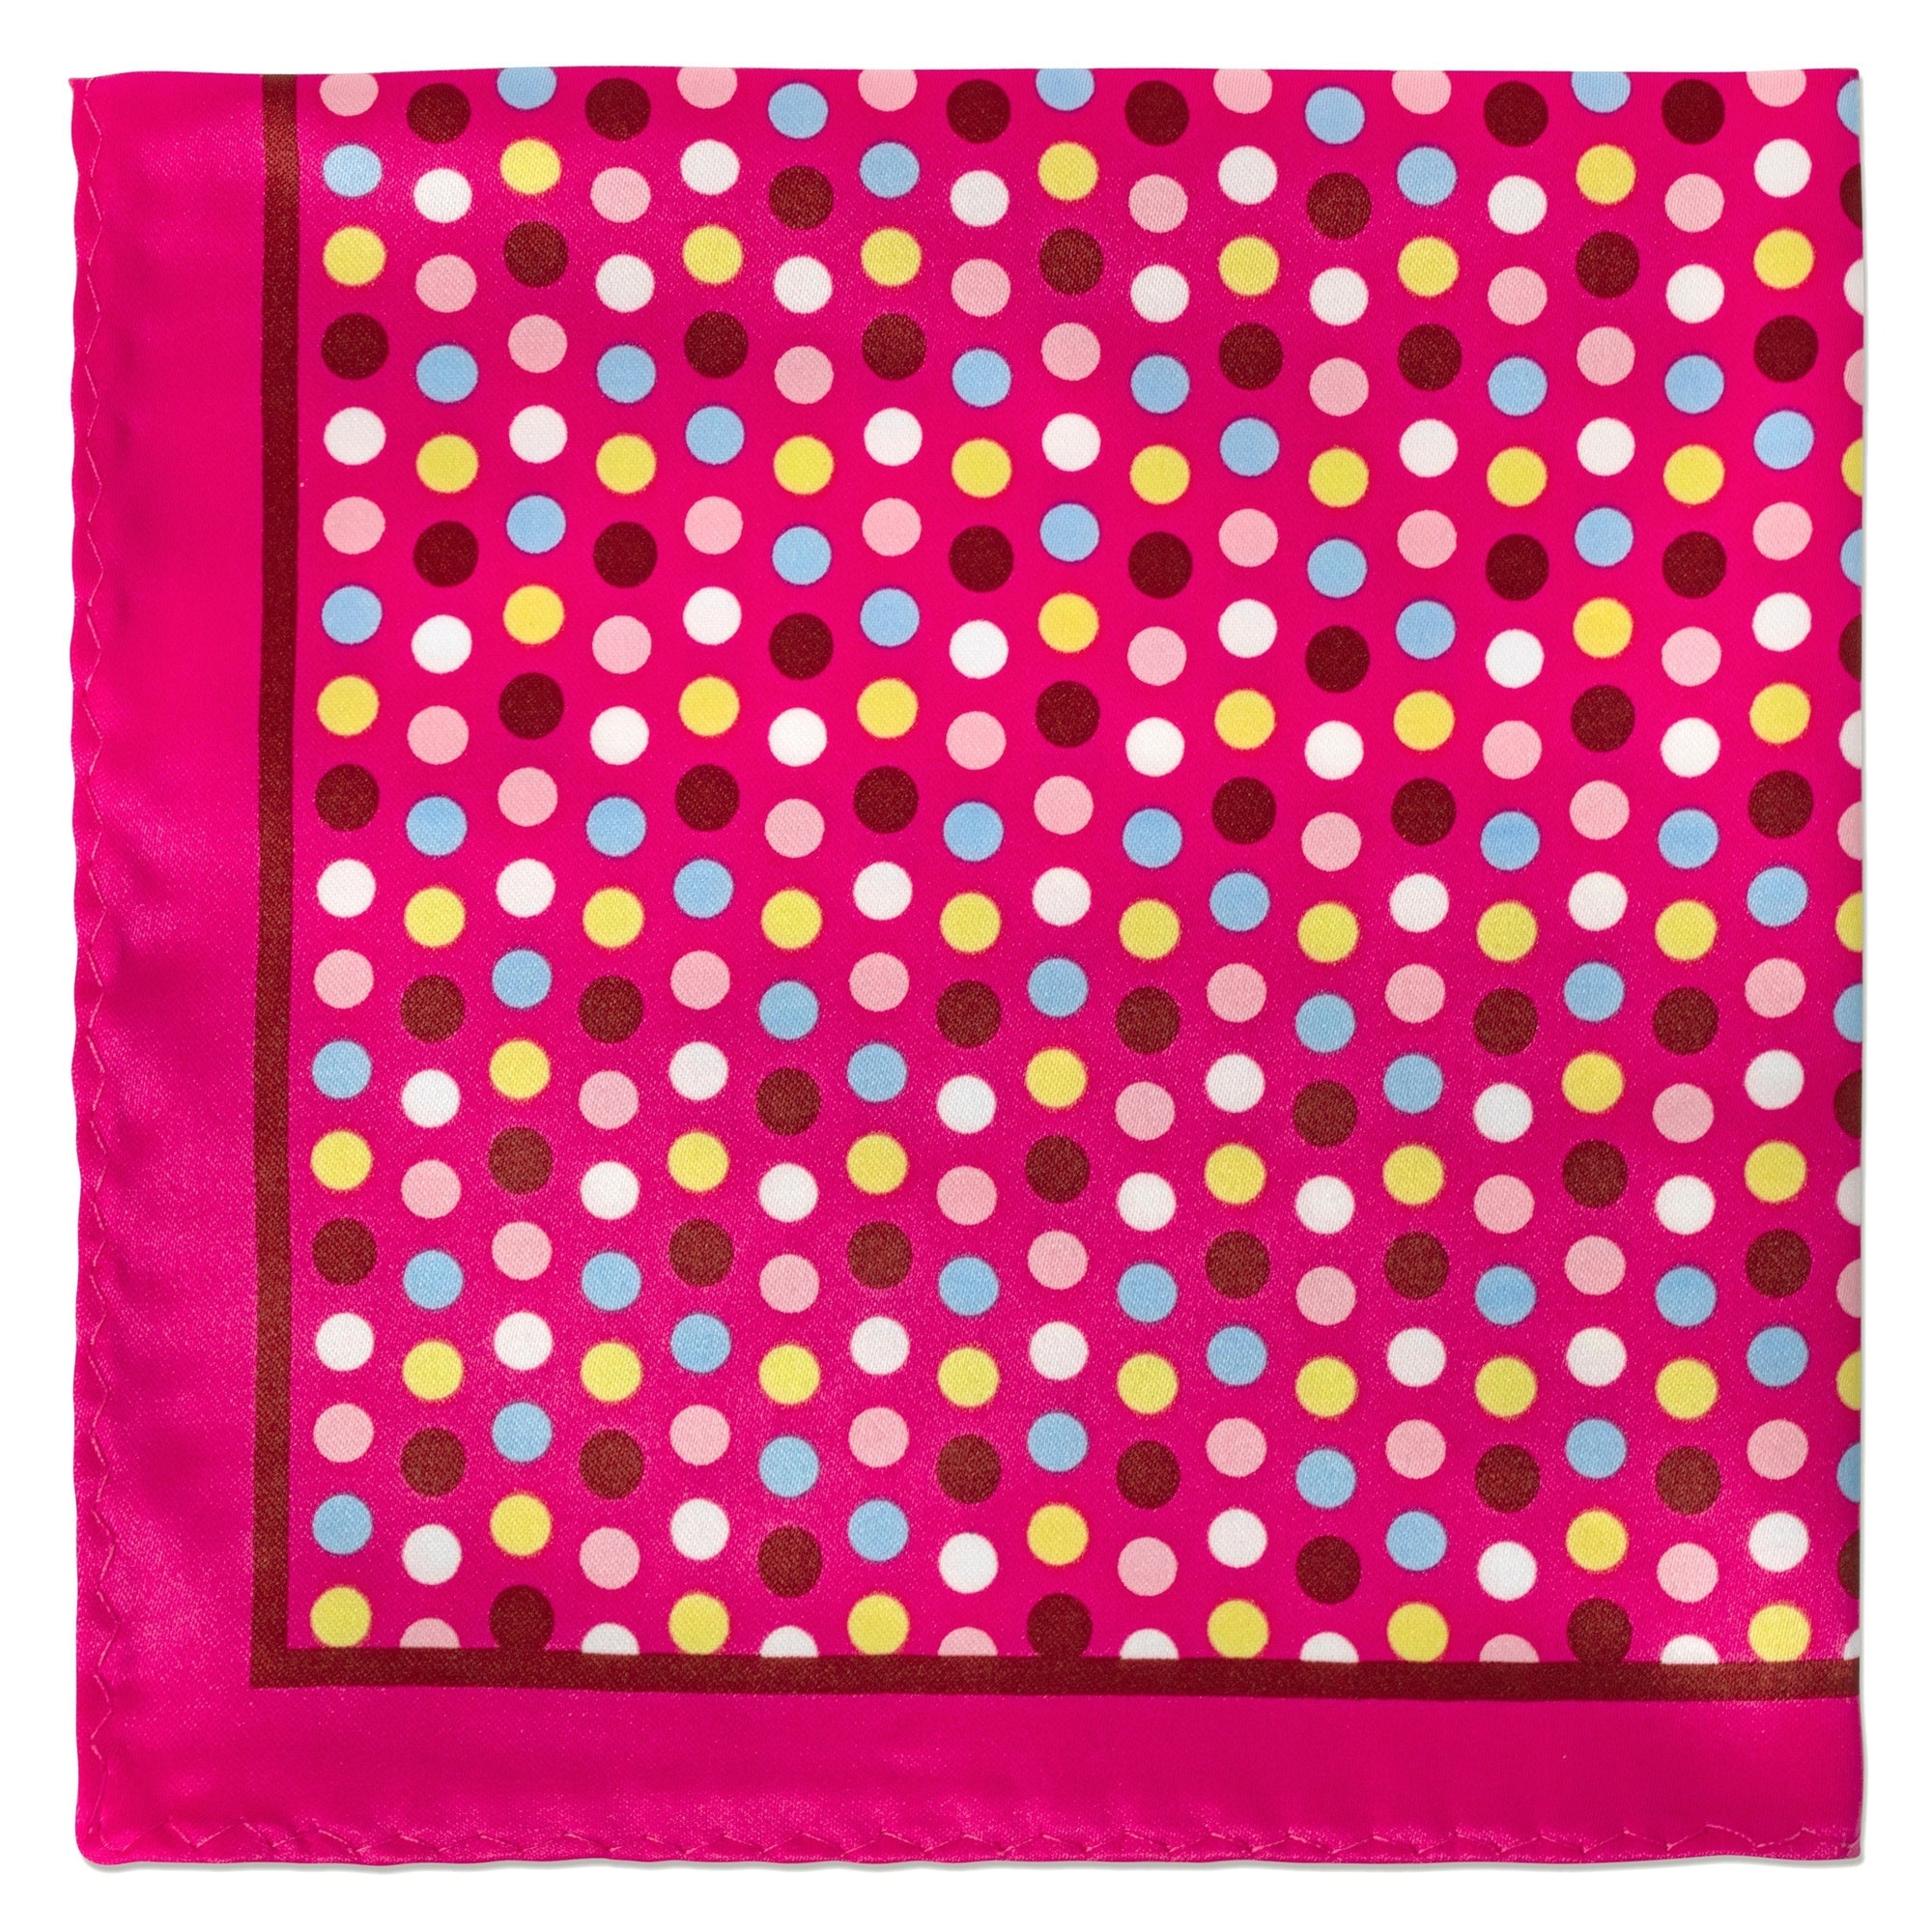 Colourful Bubble Dots Pocket Square in Fuchsia Pink-Pocket Squares-MarZthomson-Cufflinks.com.sg